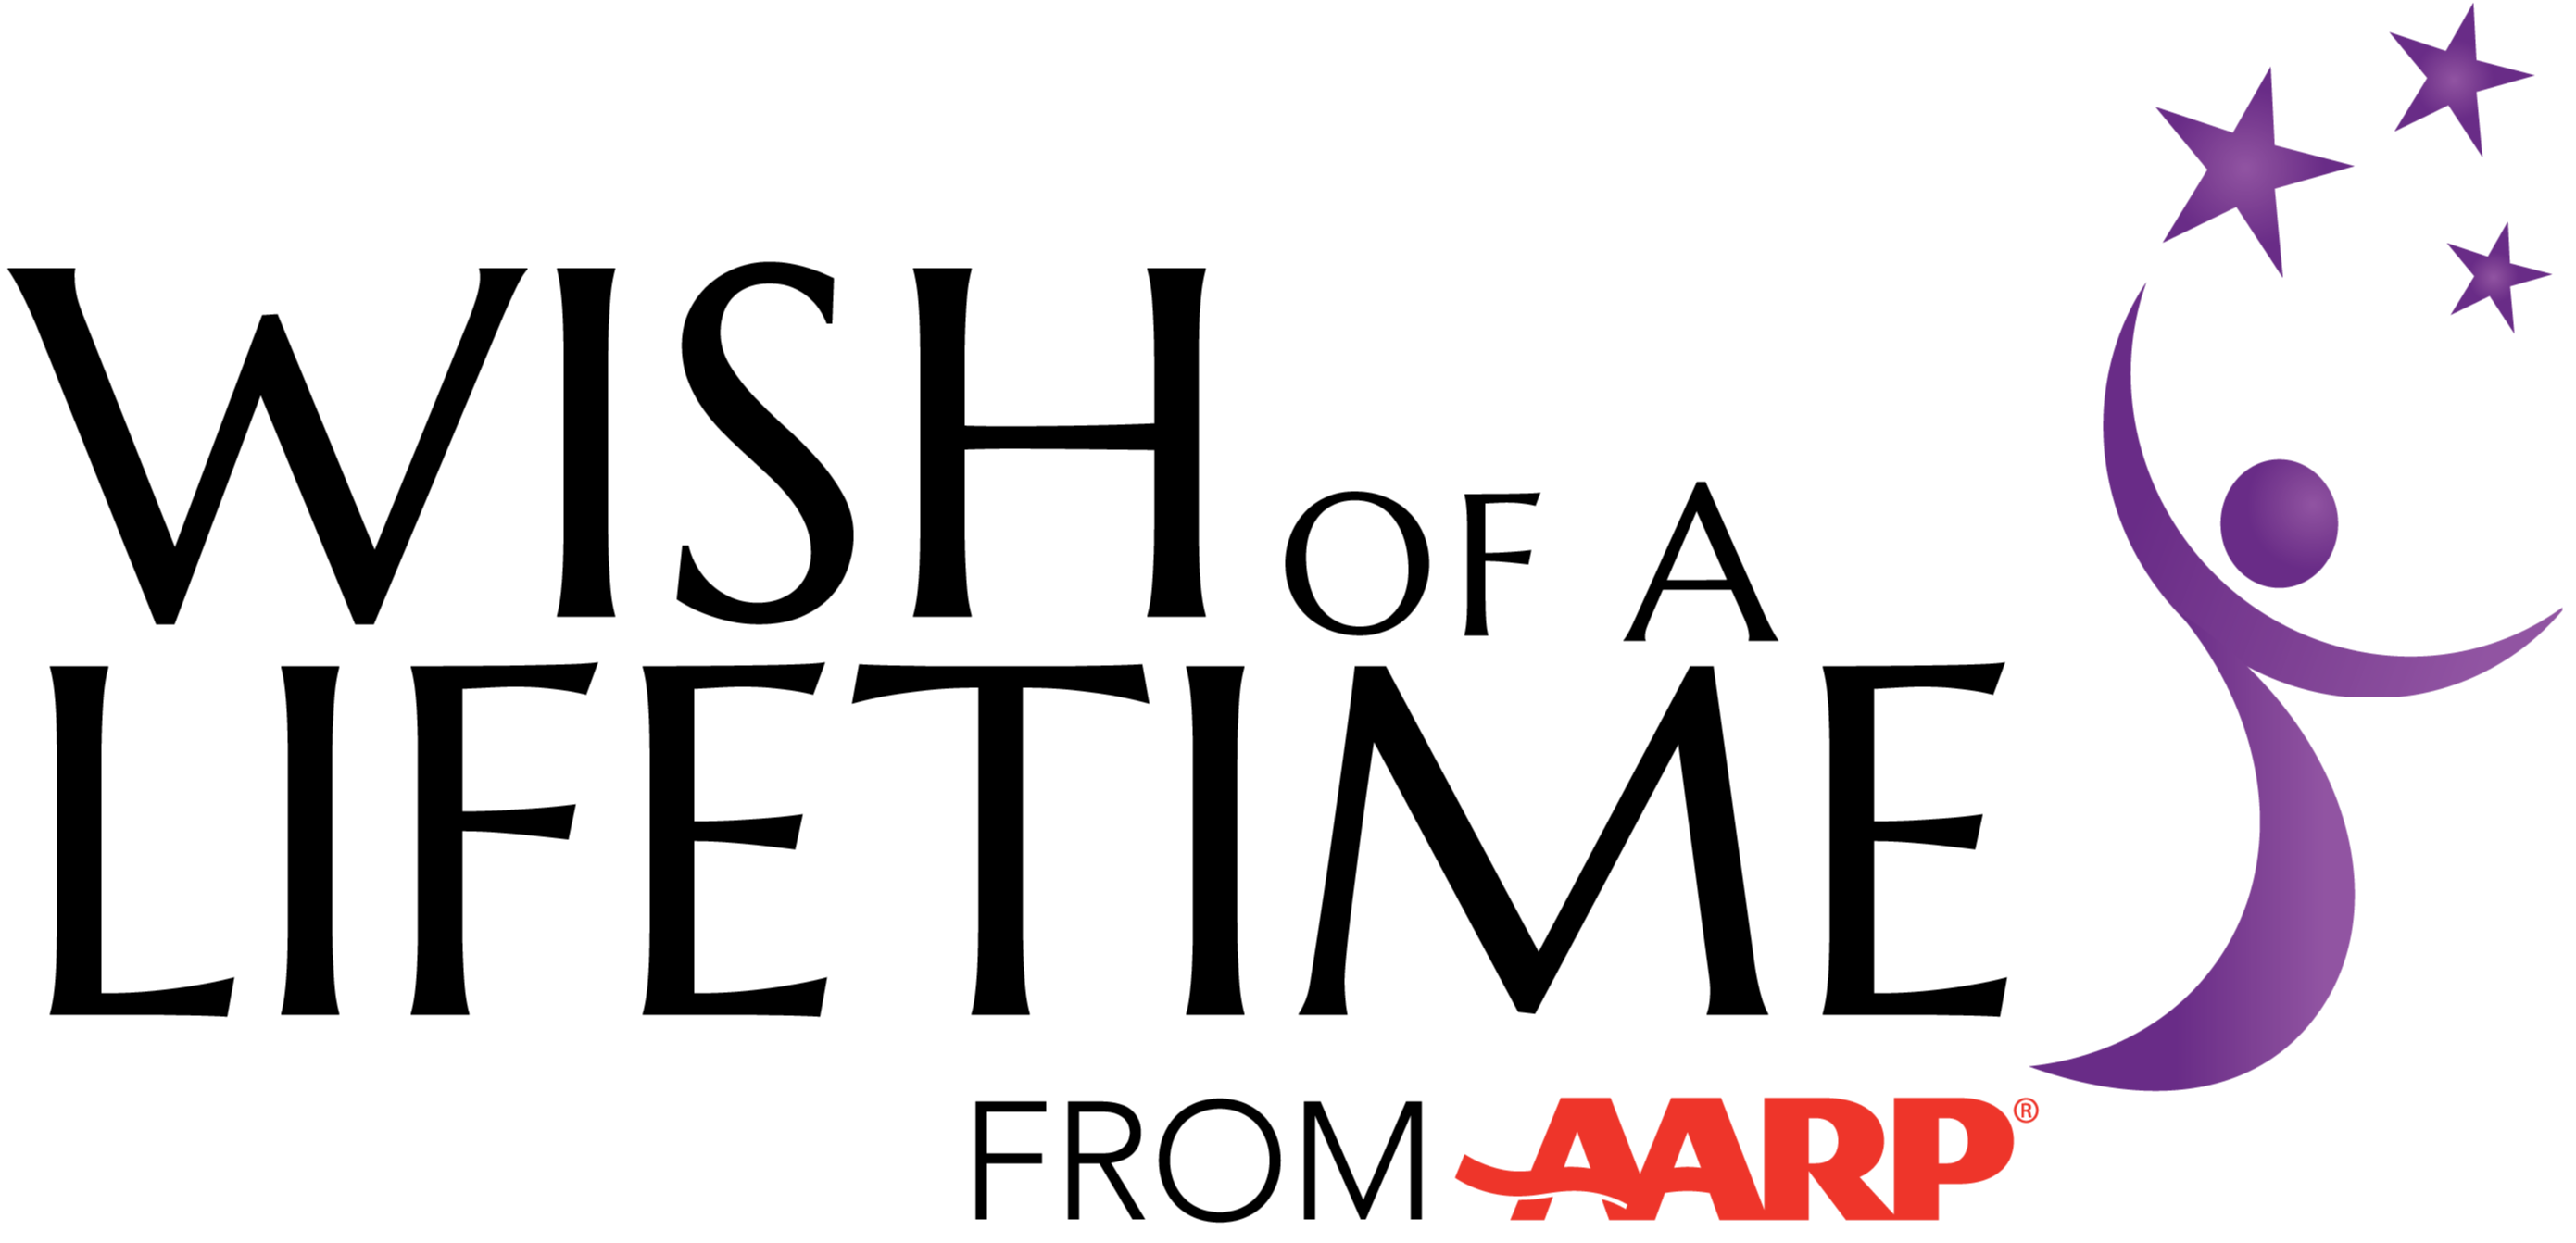 Wish of a Lifetime from AARP